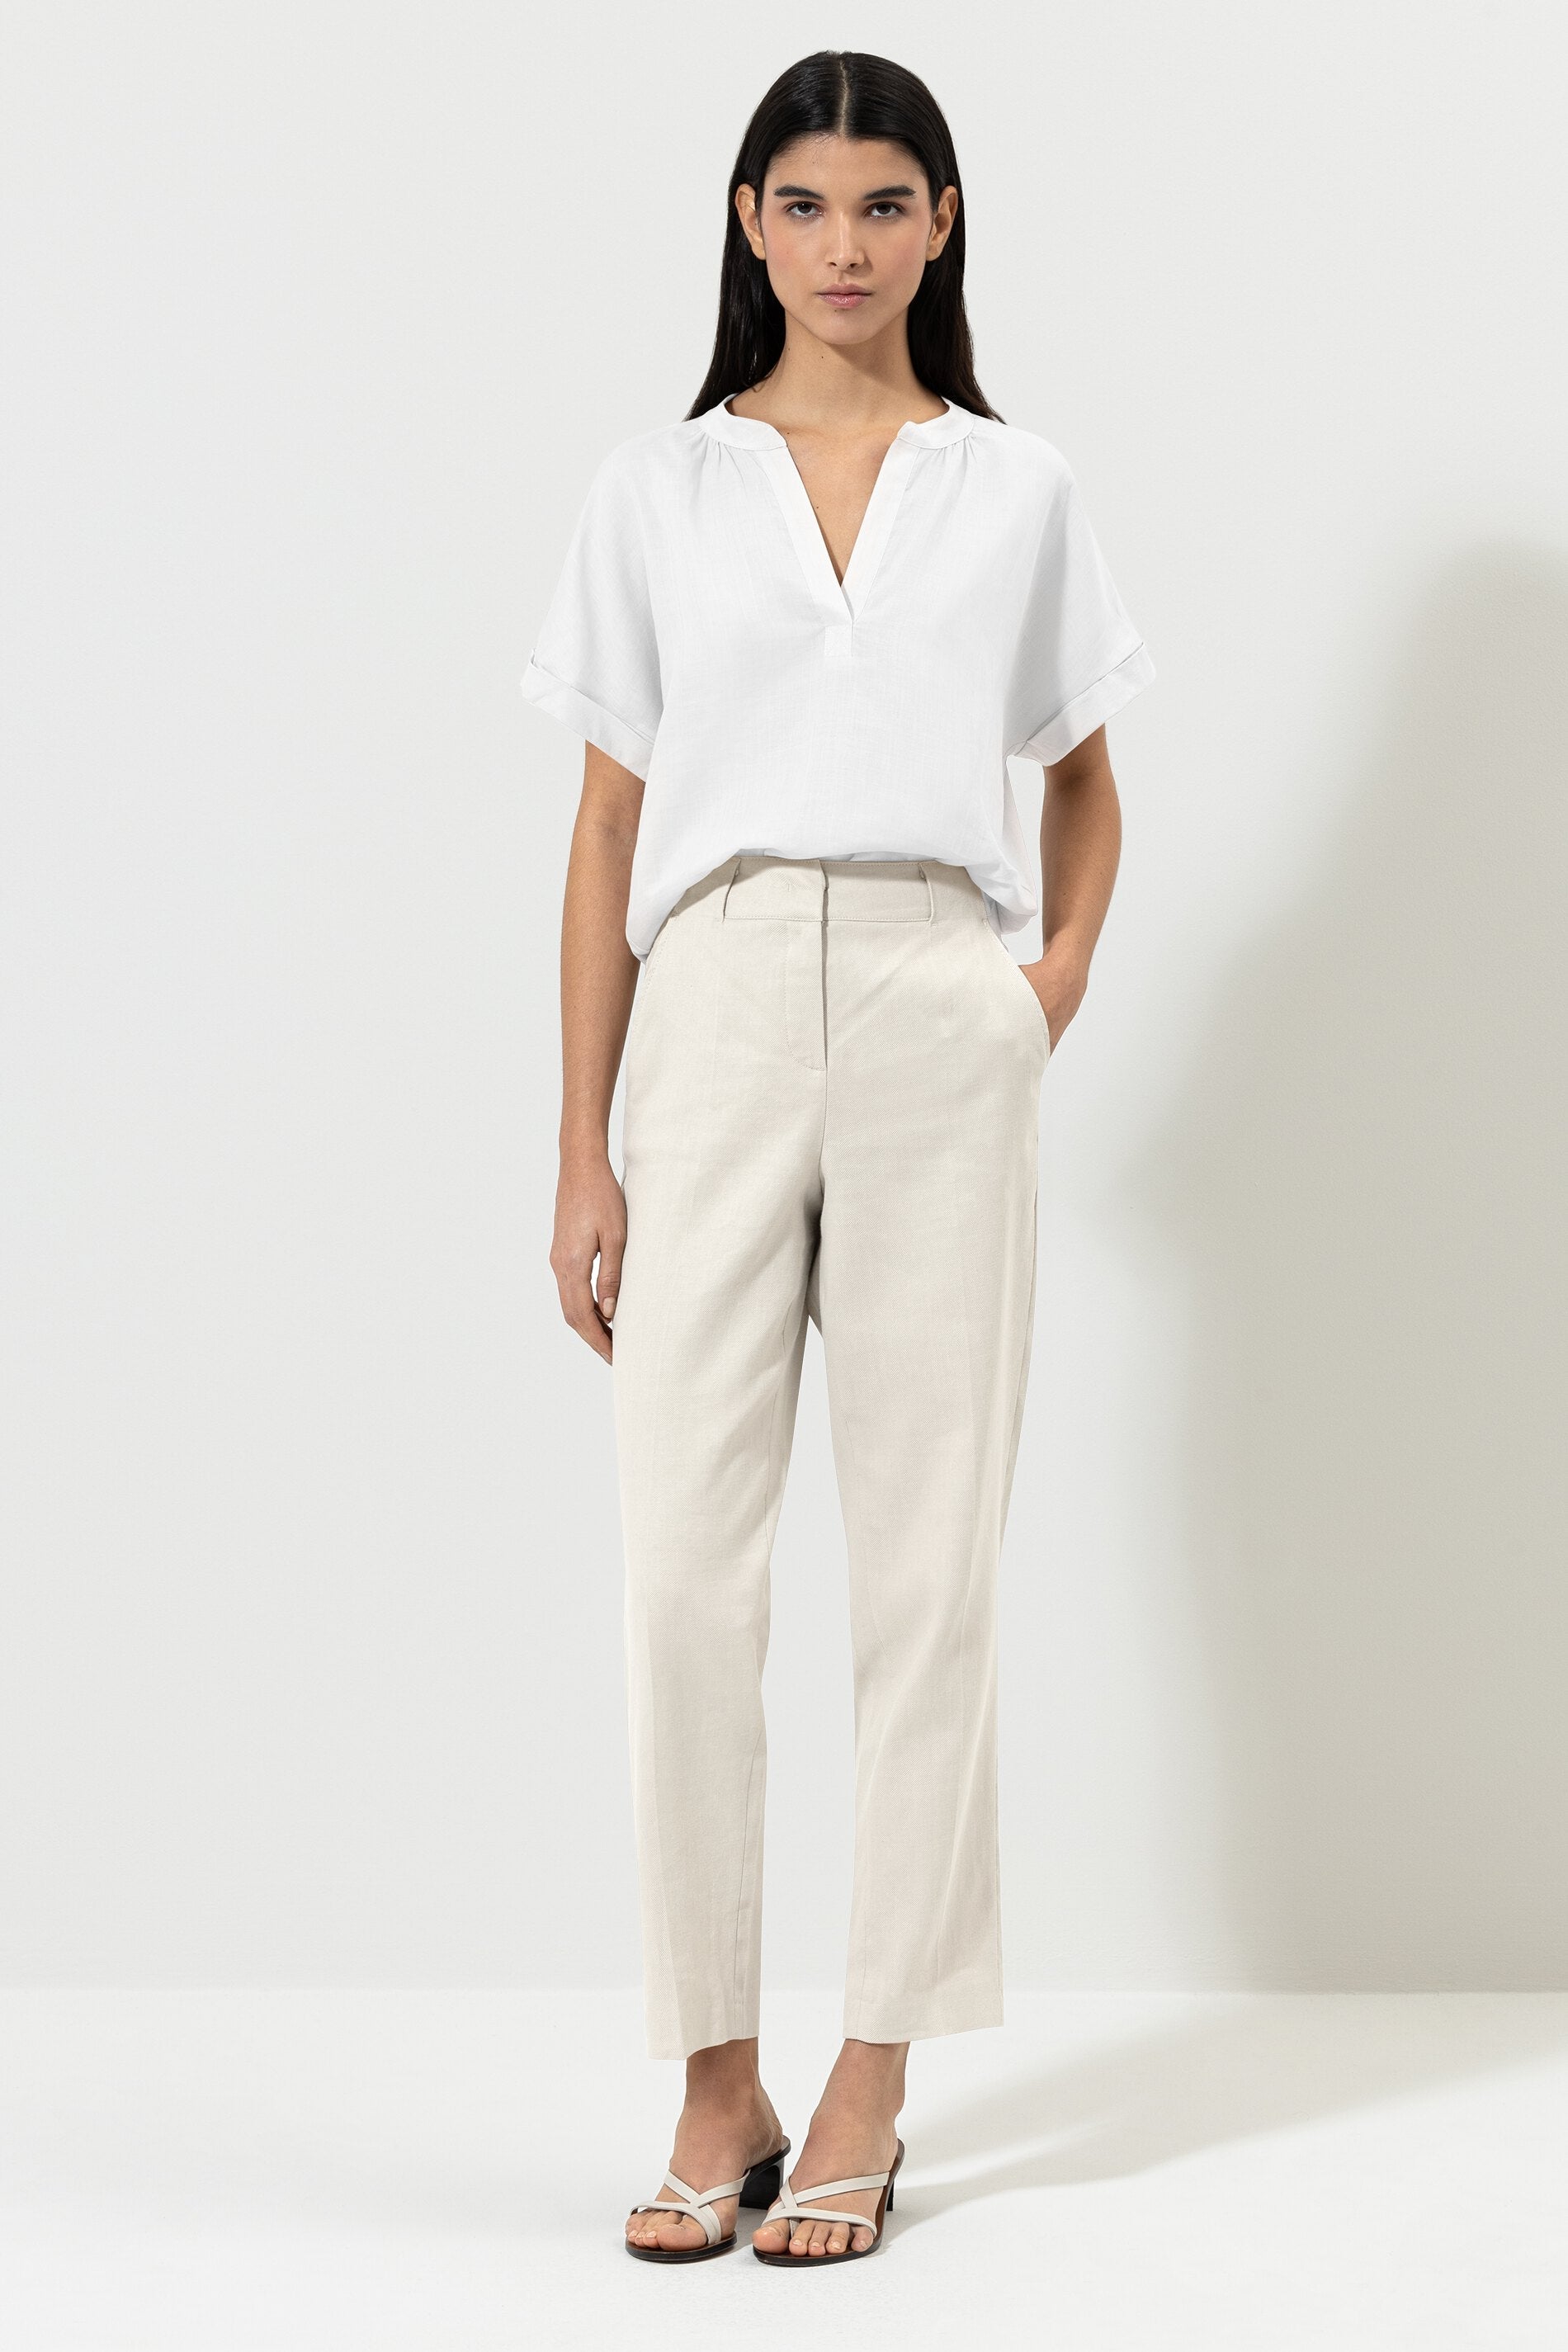 LUISA-CERANO-OUTLET-SALE-Tapered-Pants-aus-Leinen-Mix-Hosen-ARCHIVE-COLLECTION.jpg